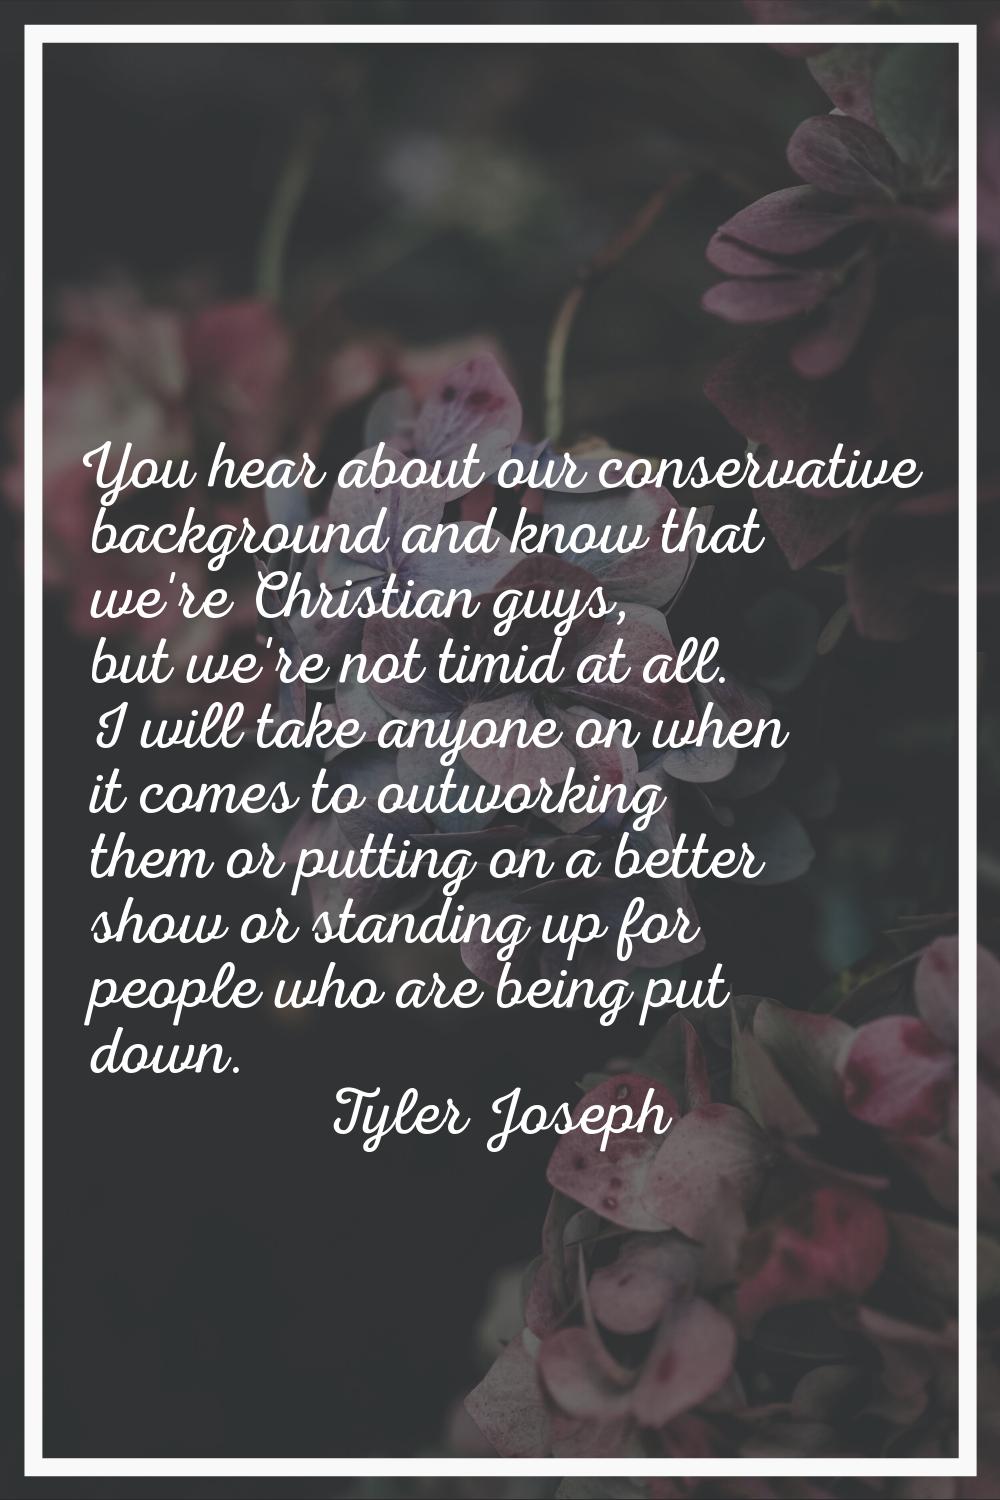 You hear about our conservative background and know that we're Christian guys, but we're not timid 